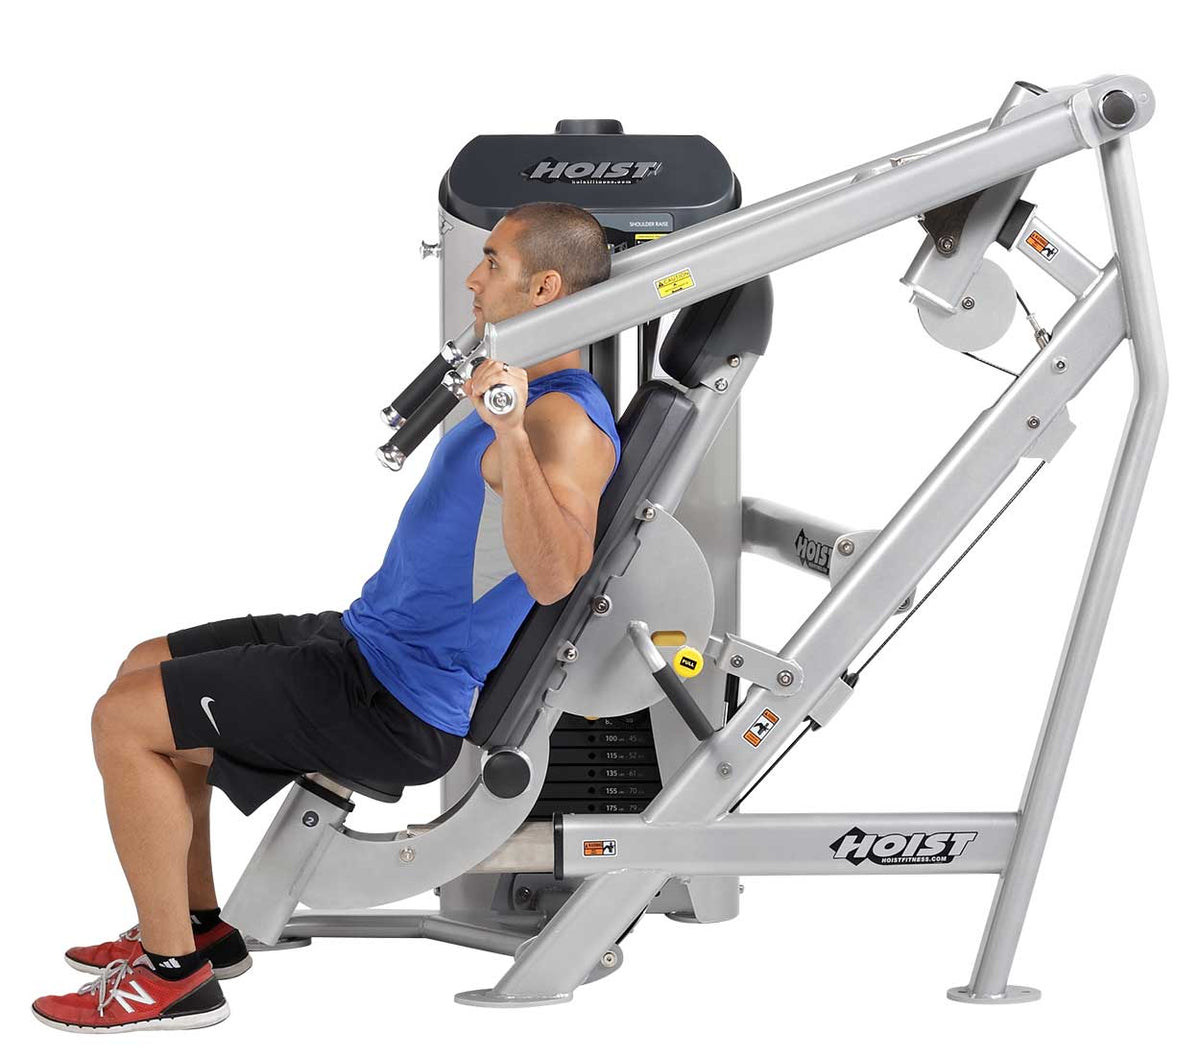 Hoist Fitness HDG-3300 Chest/Shoulder Press view of chest press exercise | Fitness Experience